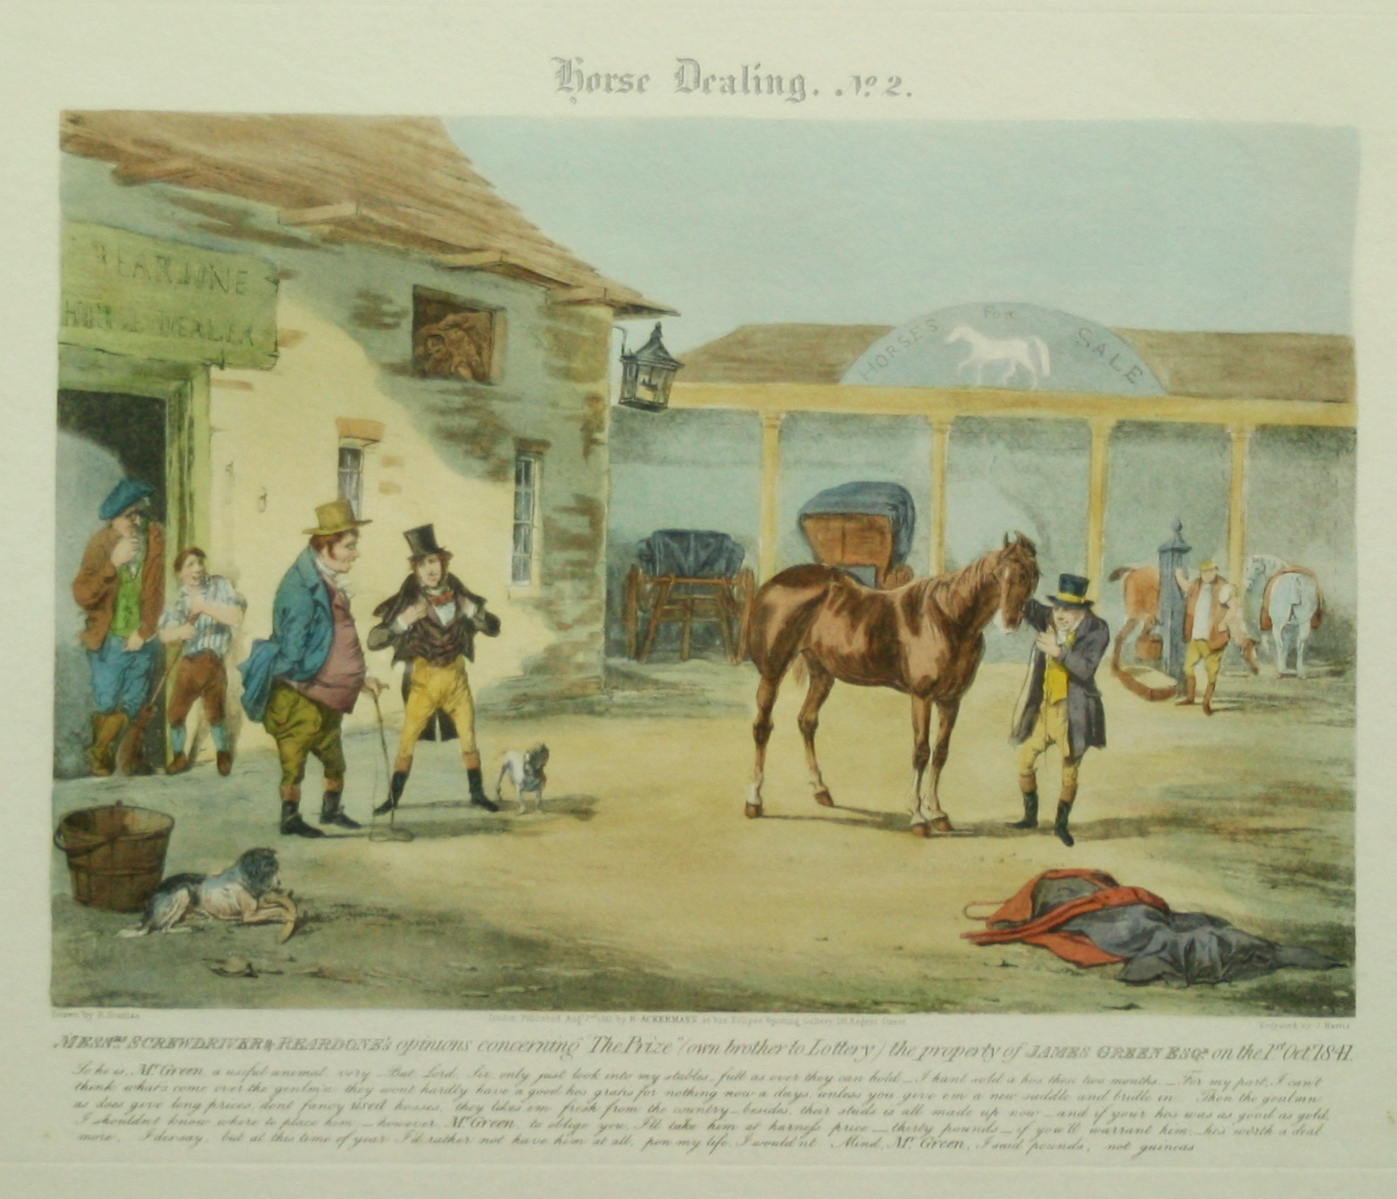 J.Harris after R Scanlan HORSE DEALING No2 an aquatint engraving published by R Ackermann 1841,